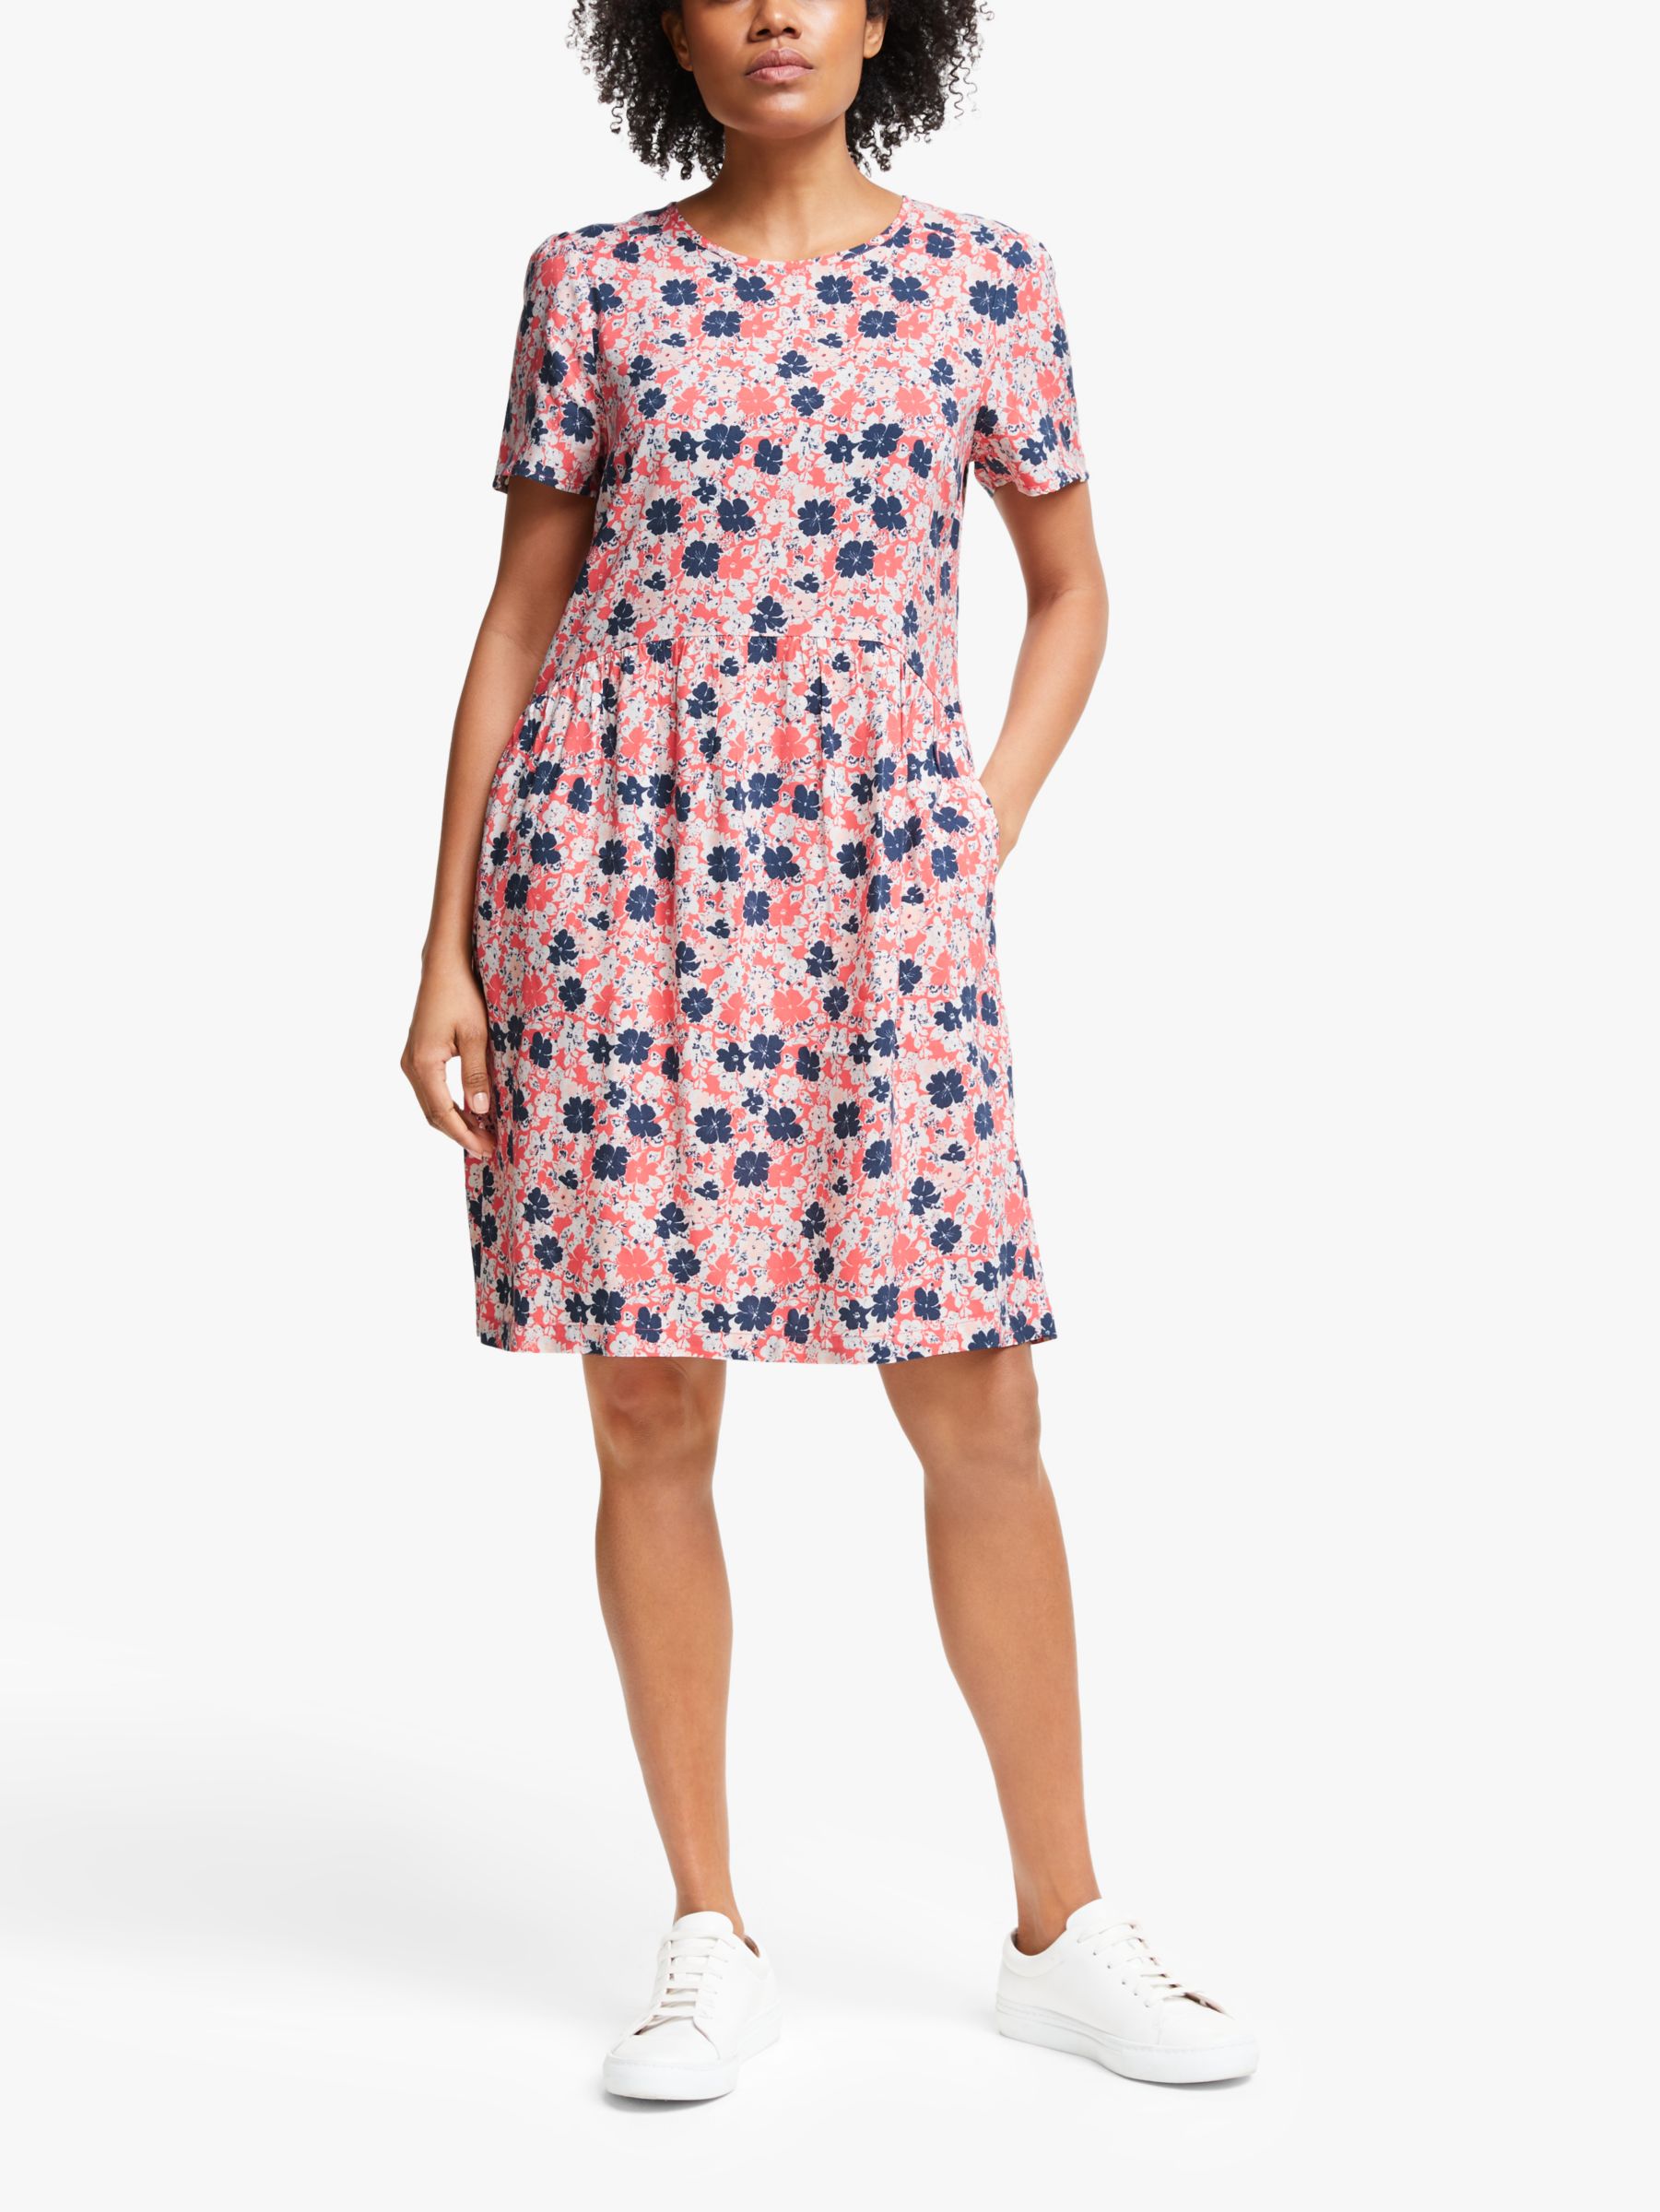 Collection WEEKEND by John Lewis Floral Shift Dress, Pink/Multi at John